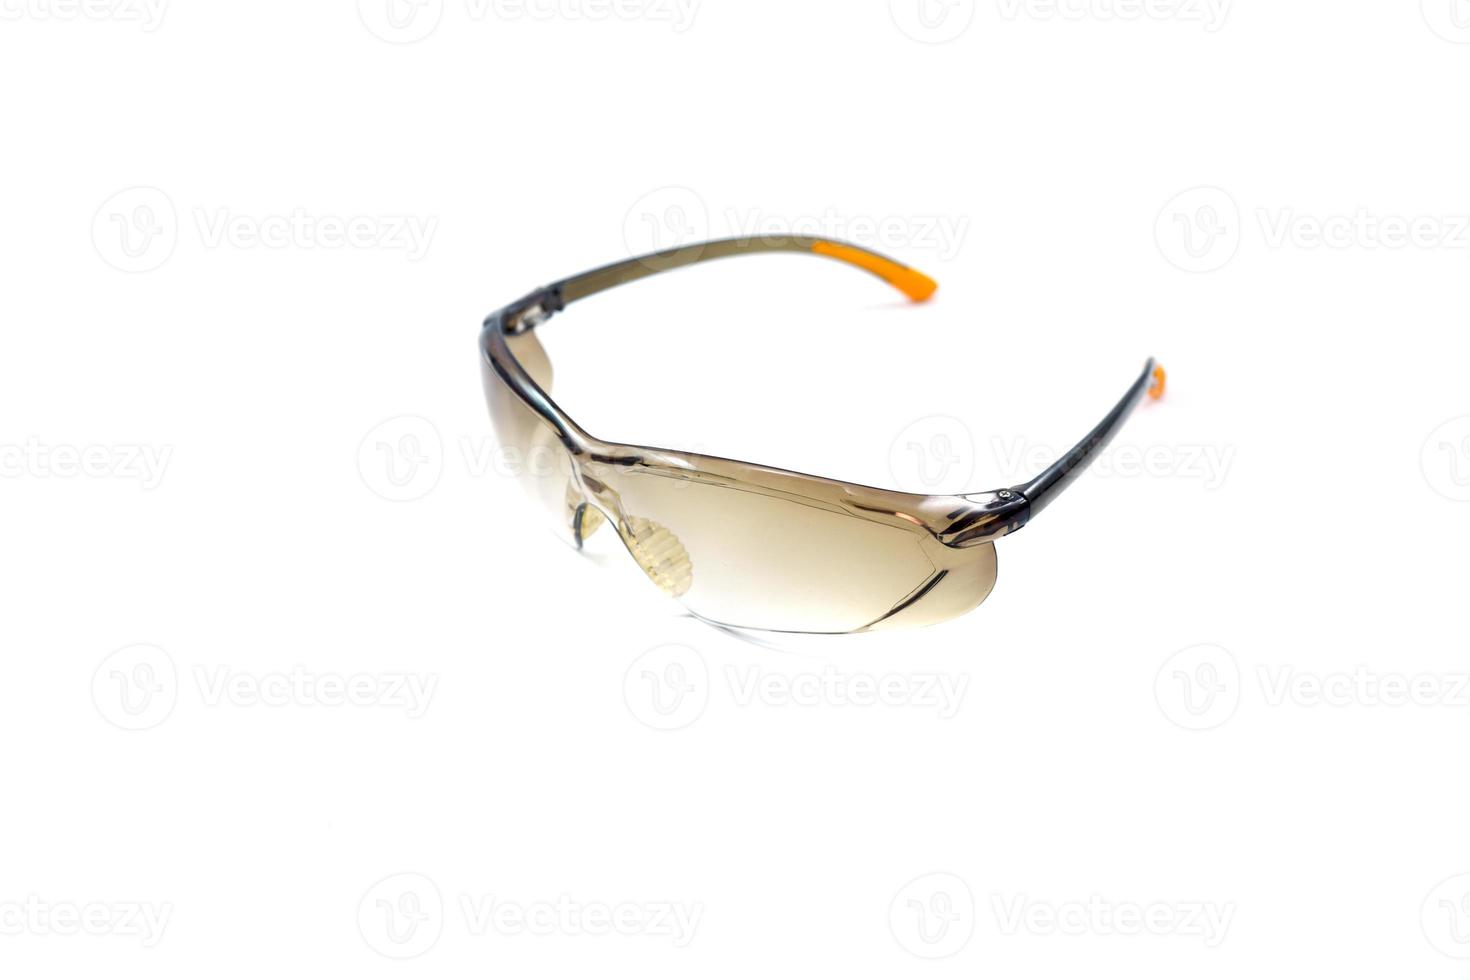 safety glasses to protect the eyes are commonly used in the field photo